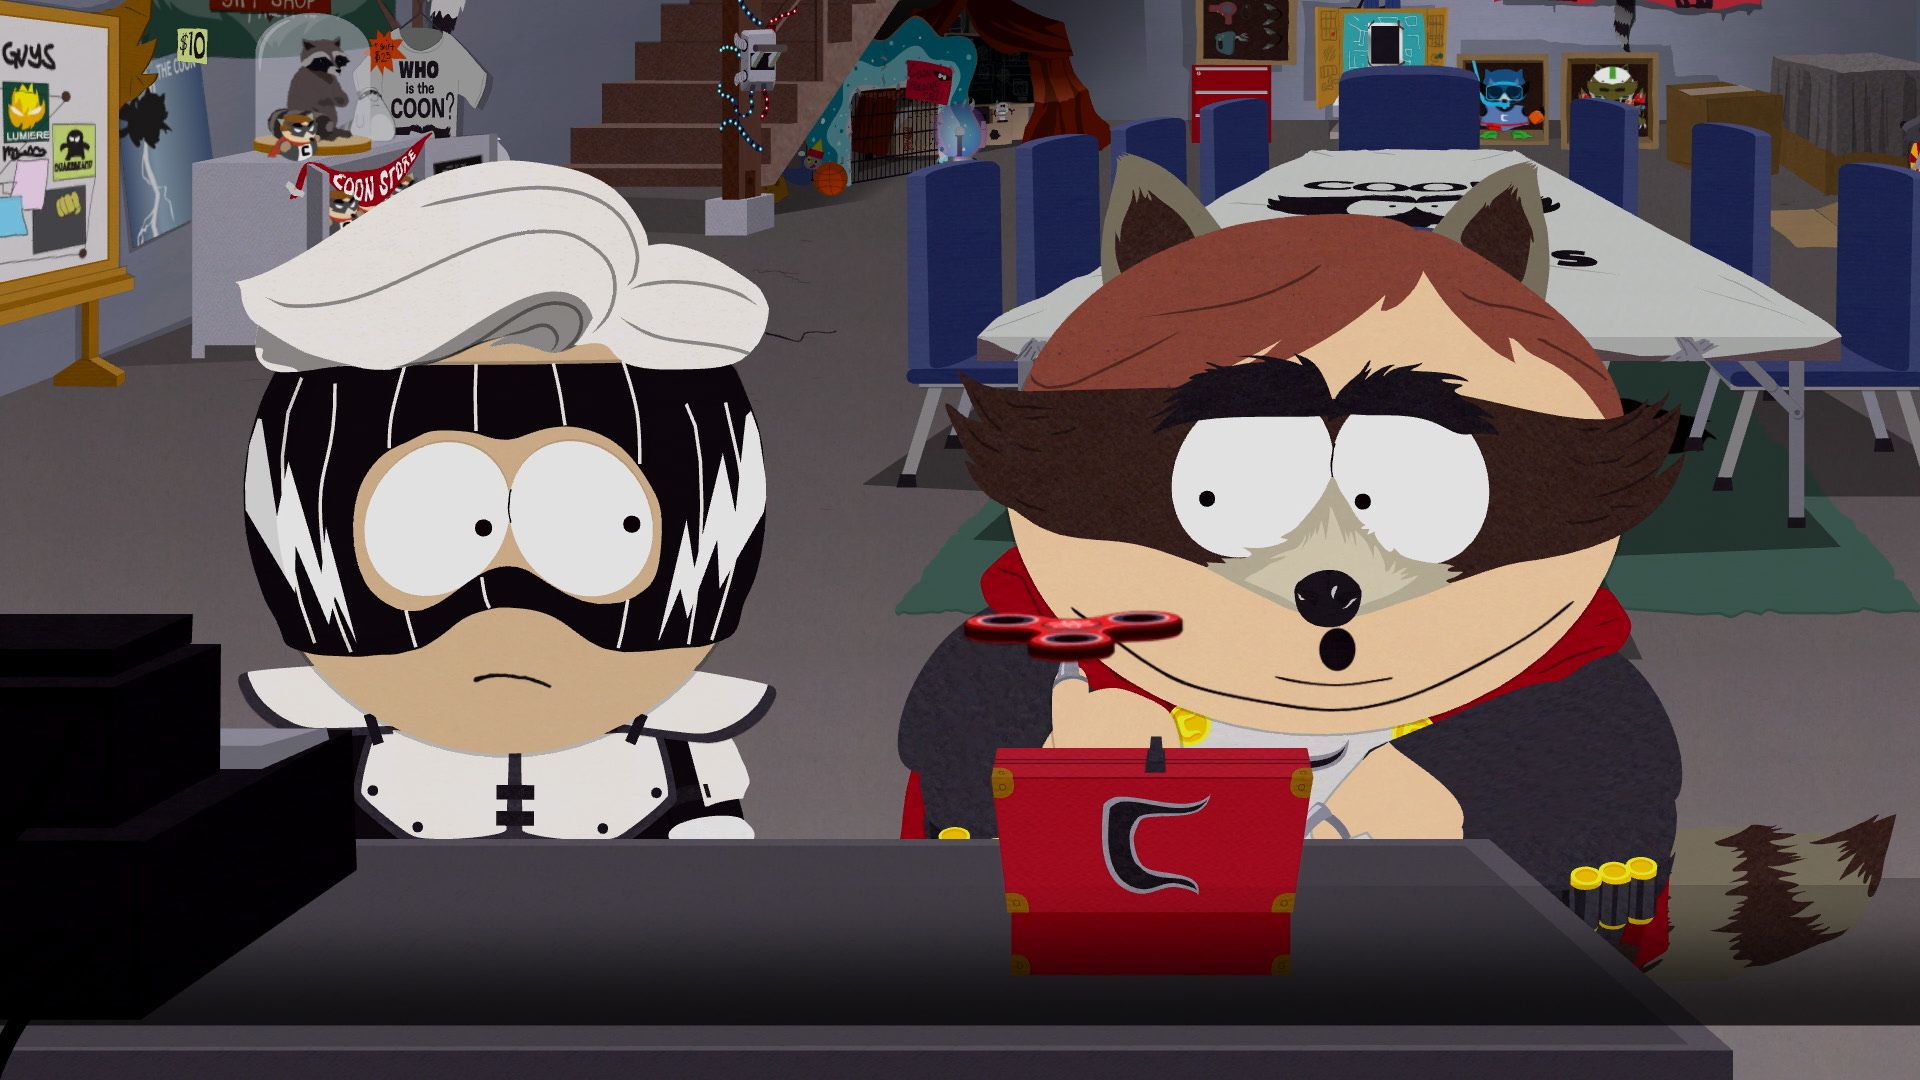 South Park The Fractured But Whole screens image 1